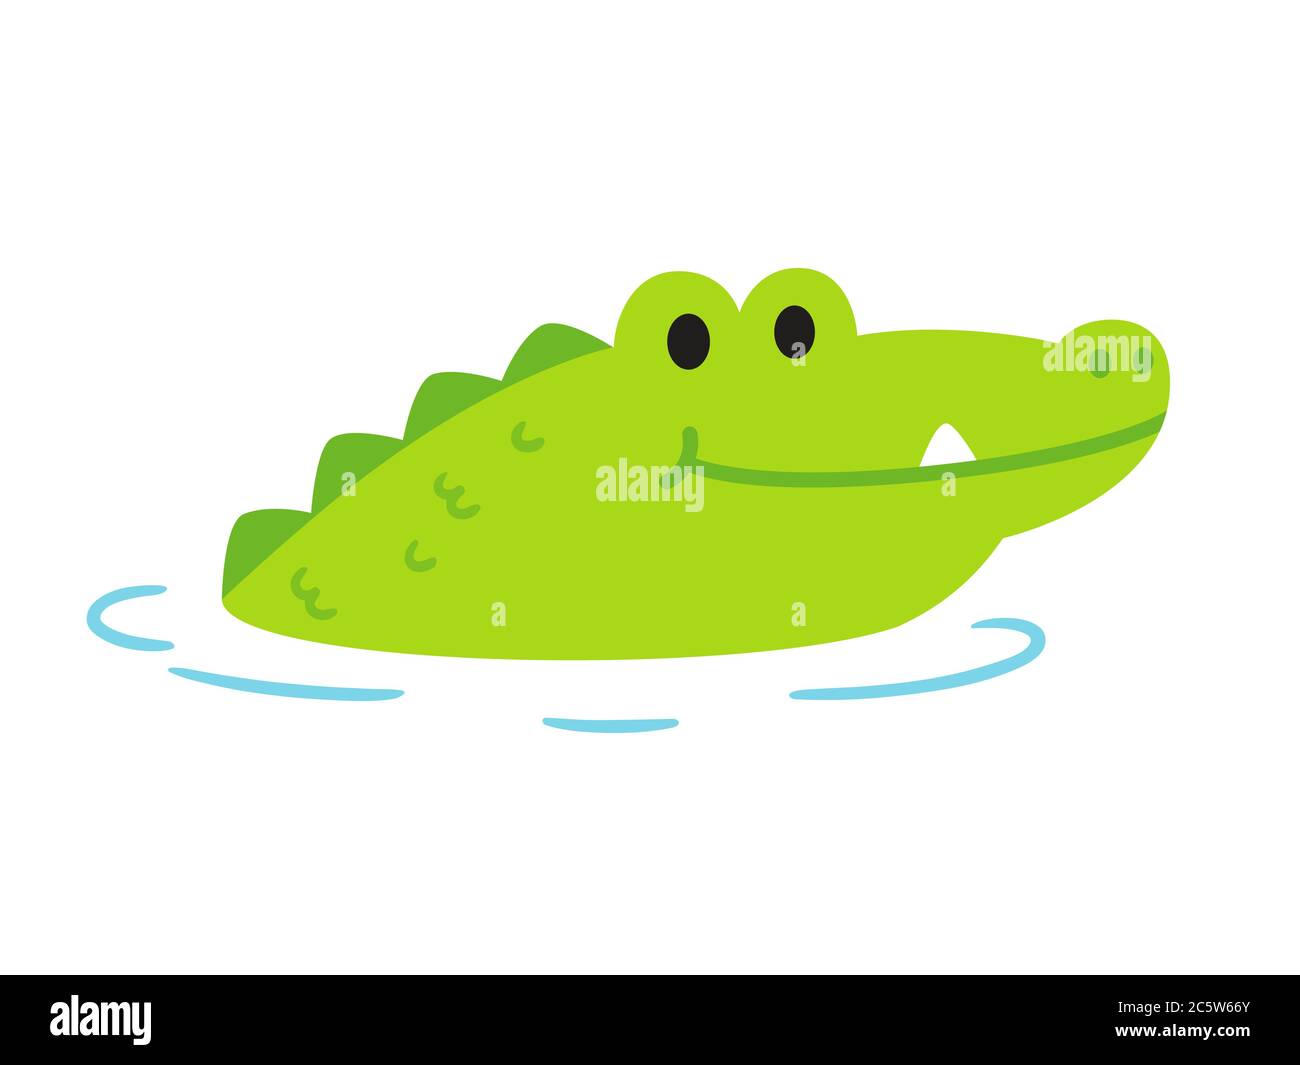 Cute cartoon alligator or crocodile sticking head out of water. Funny clip art illustration in simple flat cartoon style. Isolated vector clip art dra Stock Vector